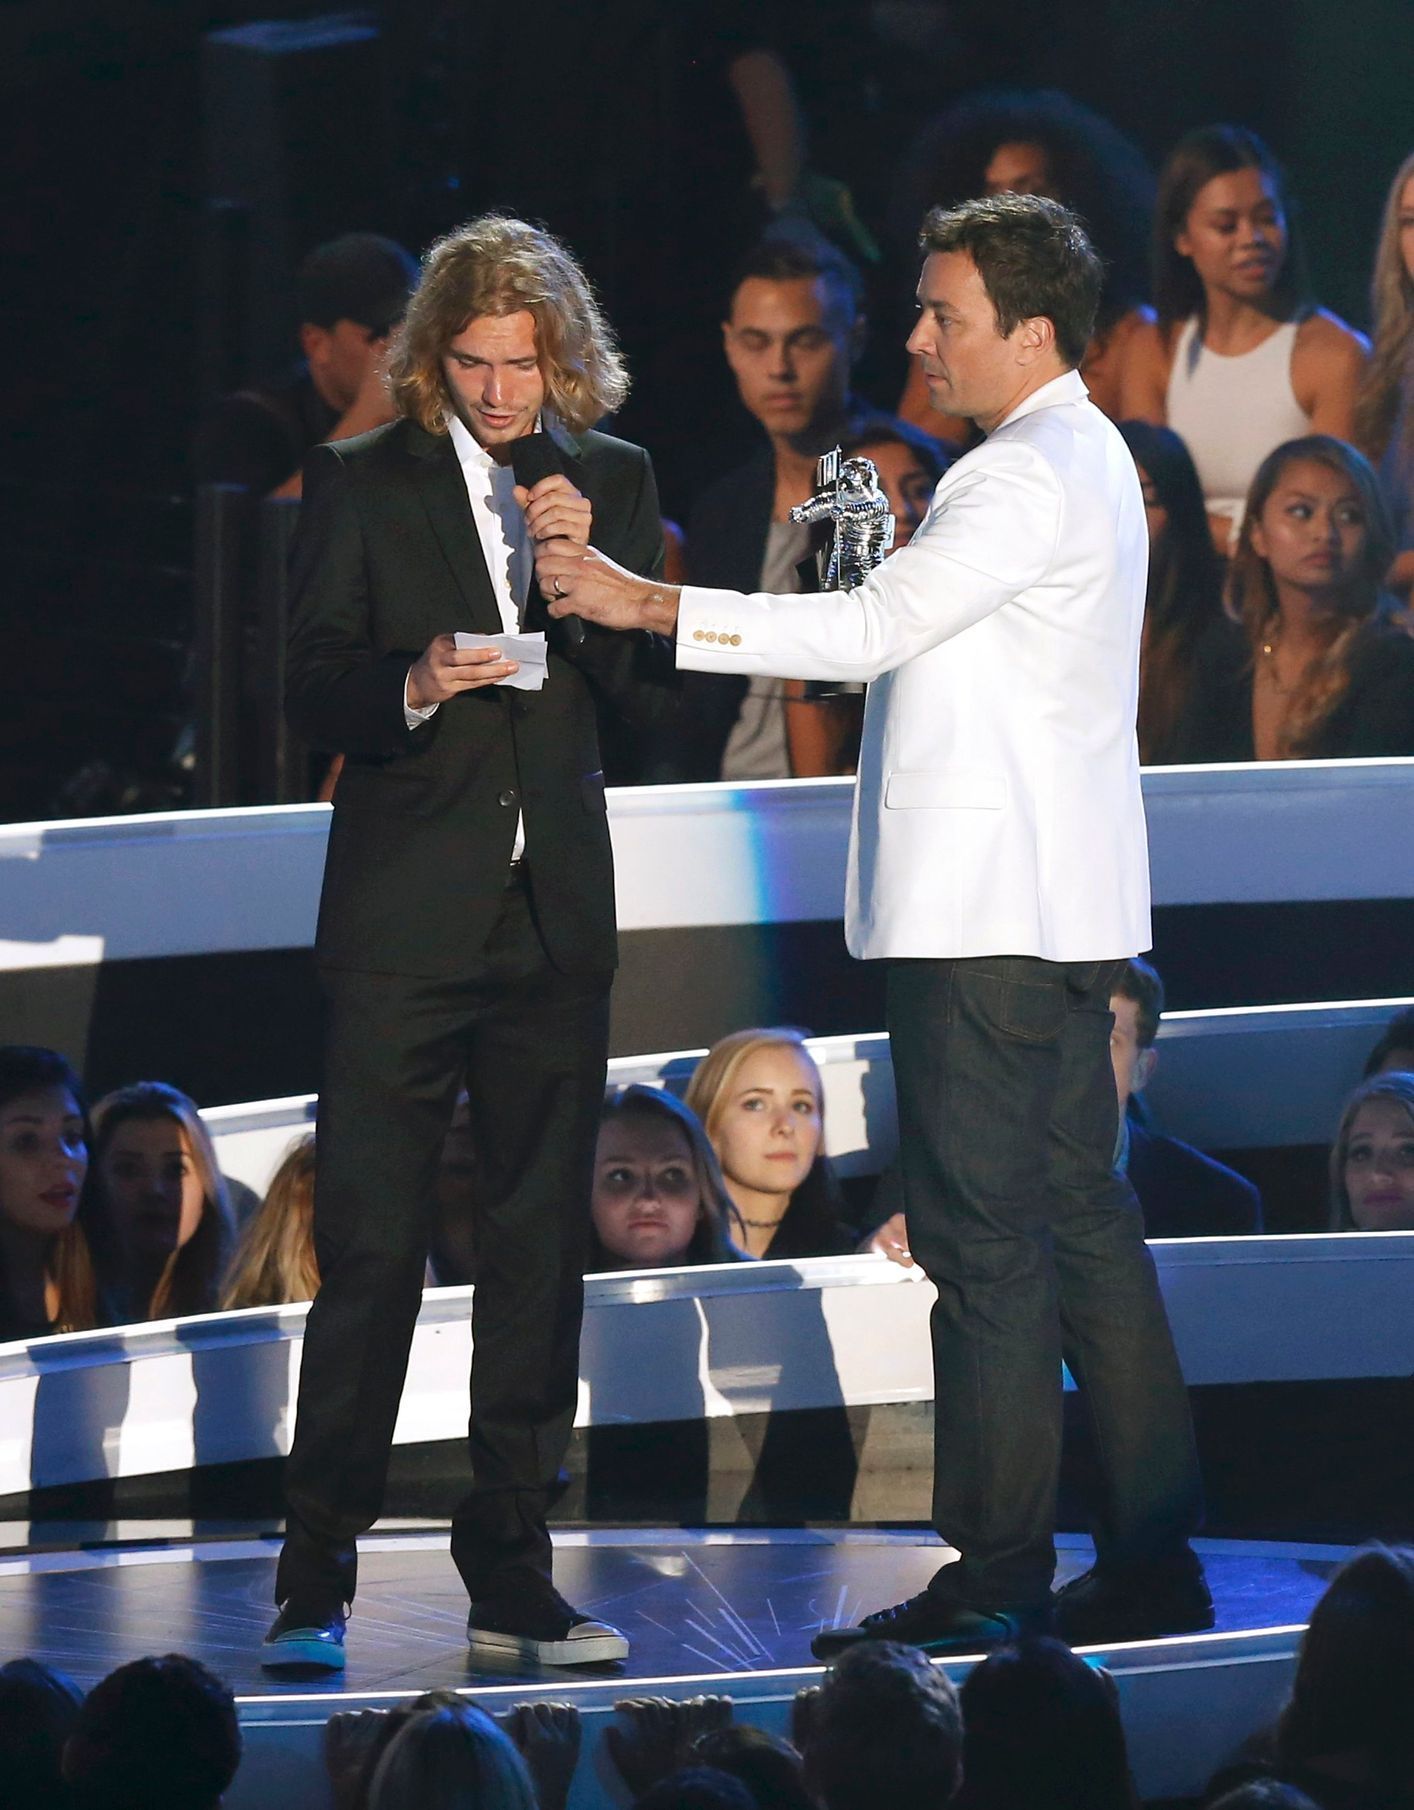 A spokesperson named Jesse accepts the award for Video of the Year for Miley Cyrus' &quot;Wrecking Ball&quot; as presenter Jimmy Fallon waits during the 2014 MTV Video Music Awards in Inglewood